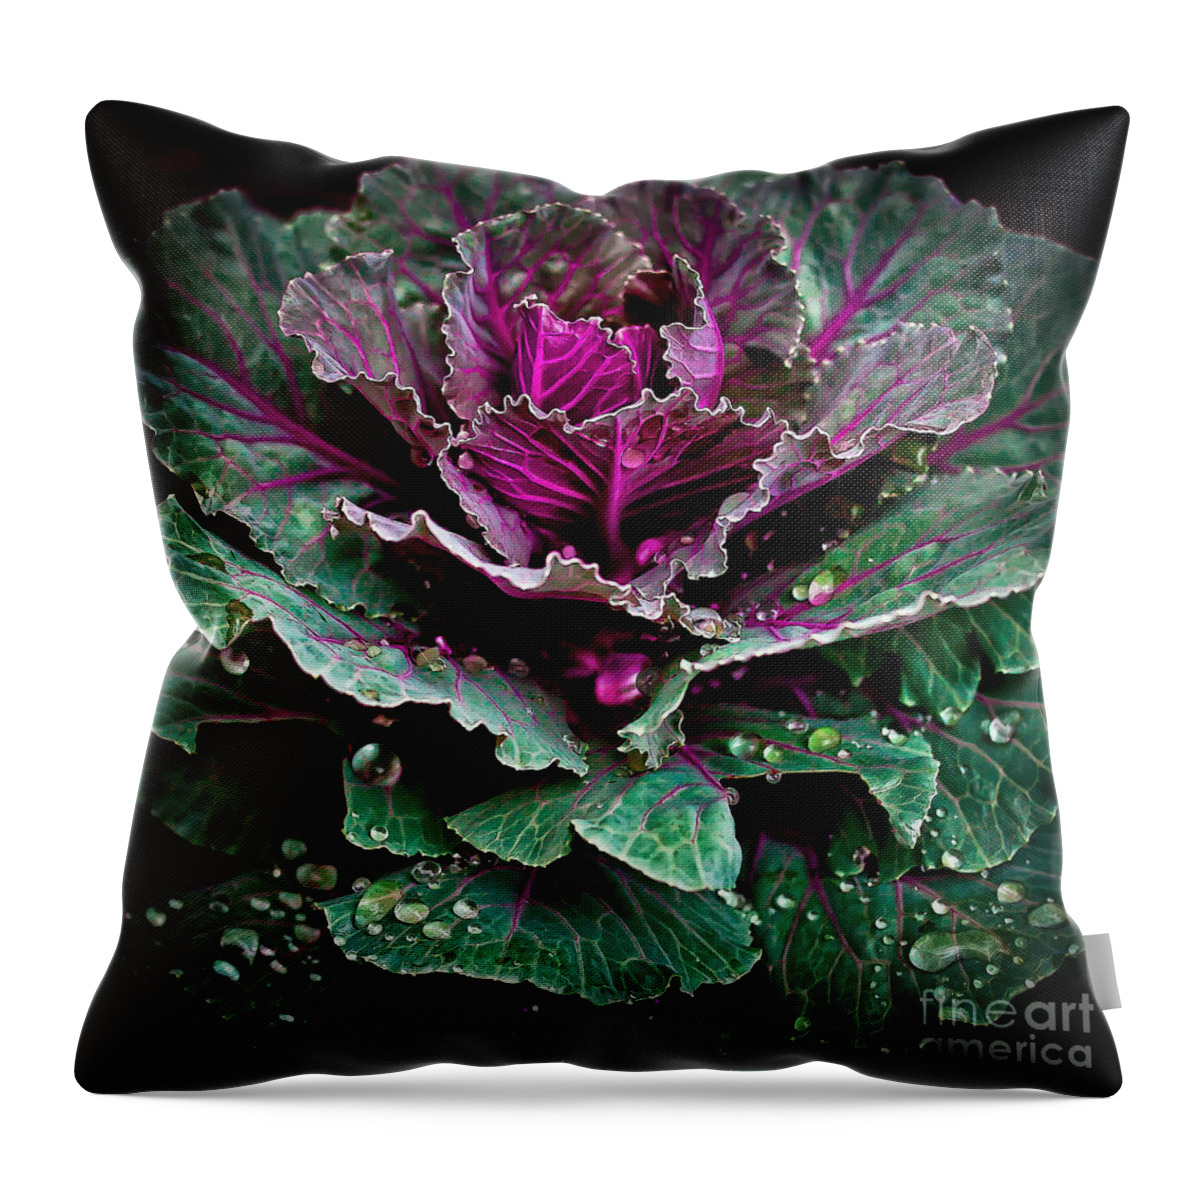 Rain Throw Pillow featuring the photograph Decorative Cabbage After Rain Photograph by Walt Foegelle